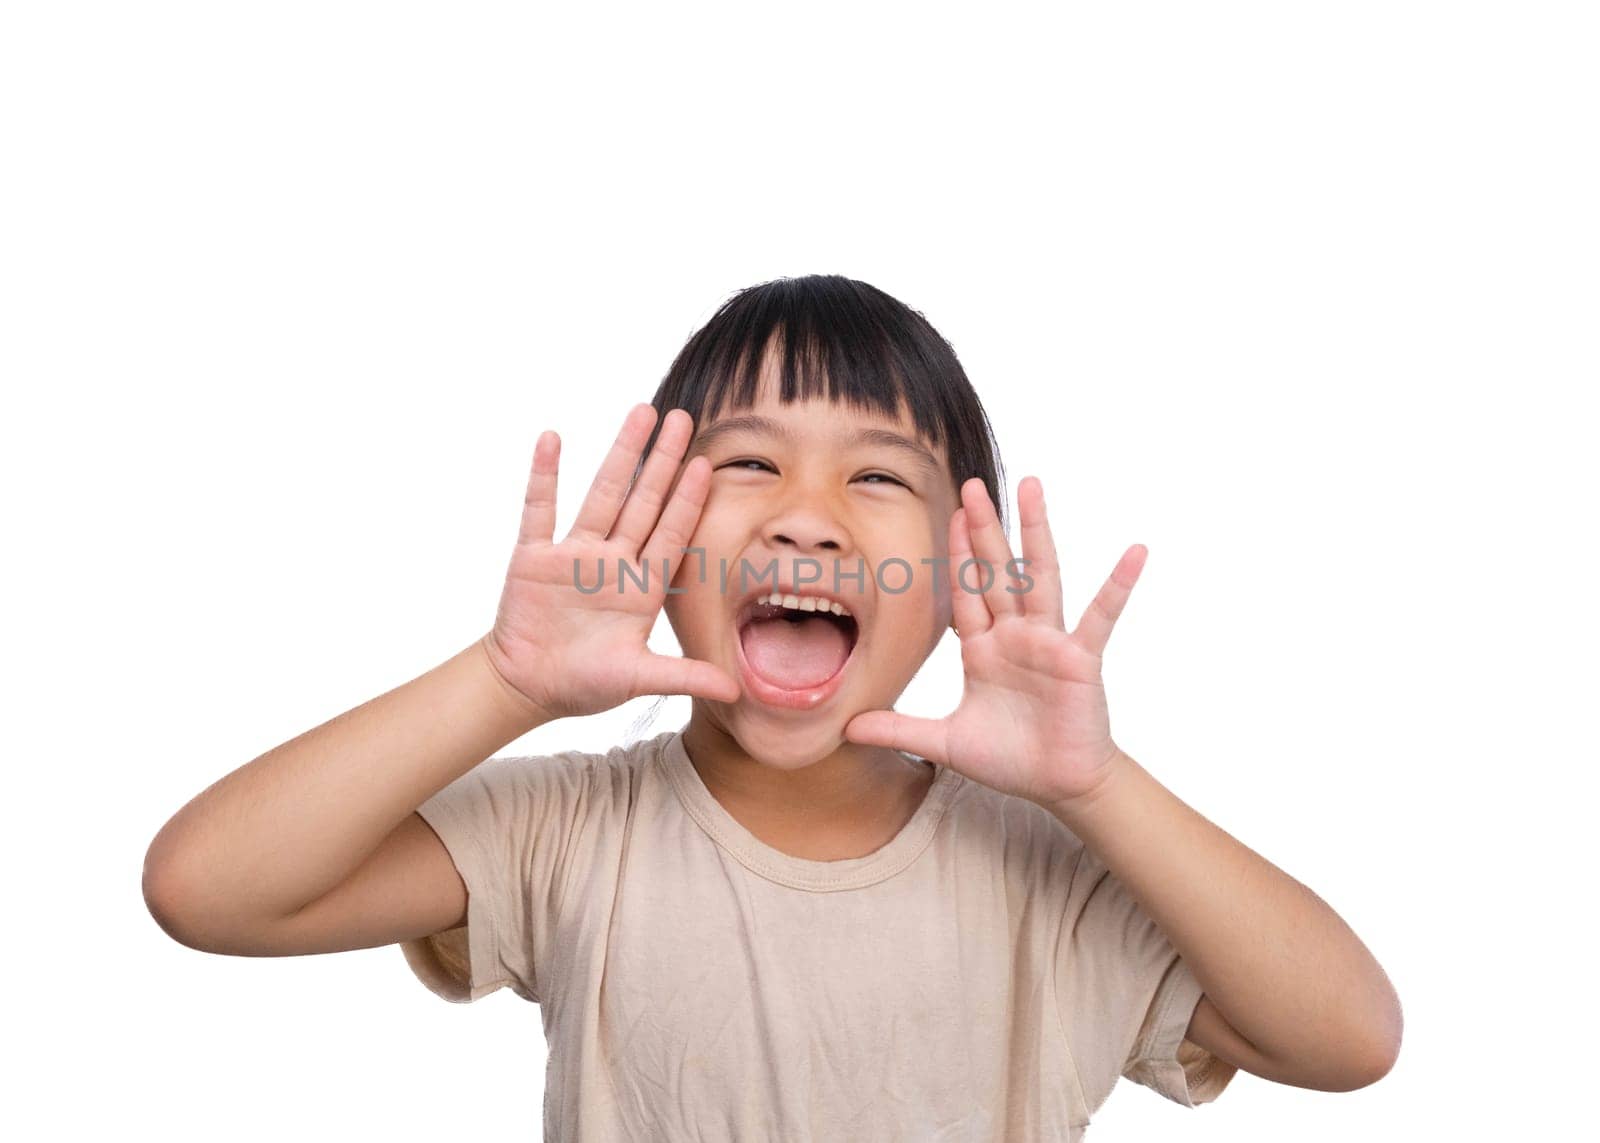 Cute little girl shouting and holding palm near mouth on white background.